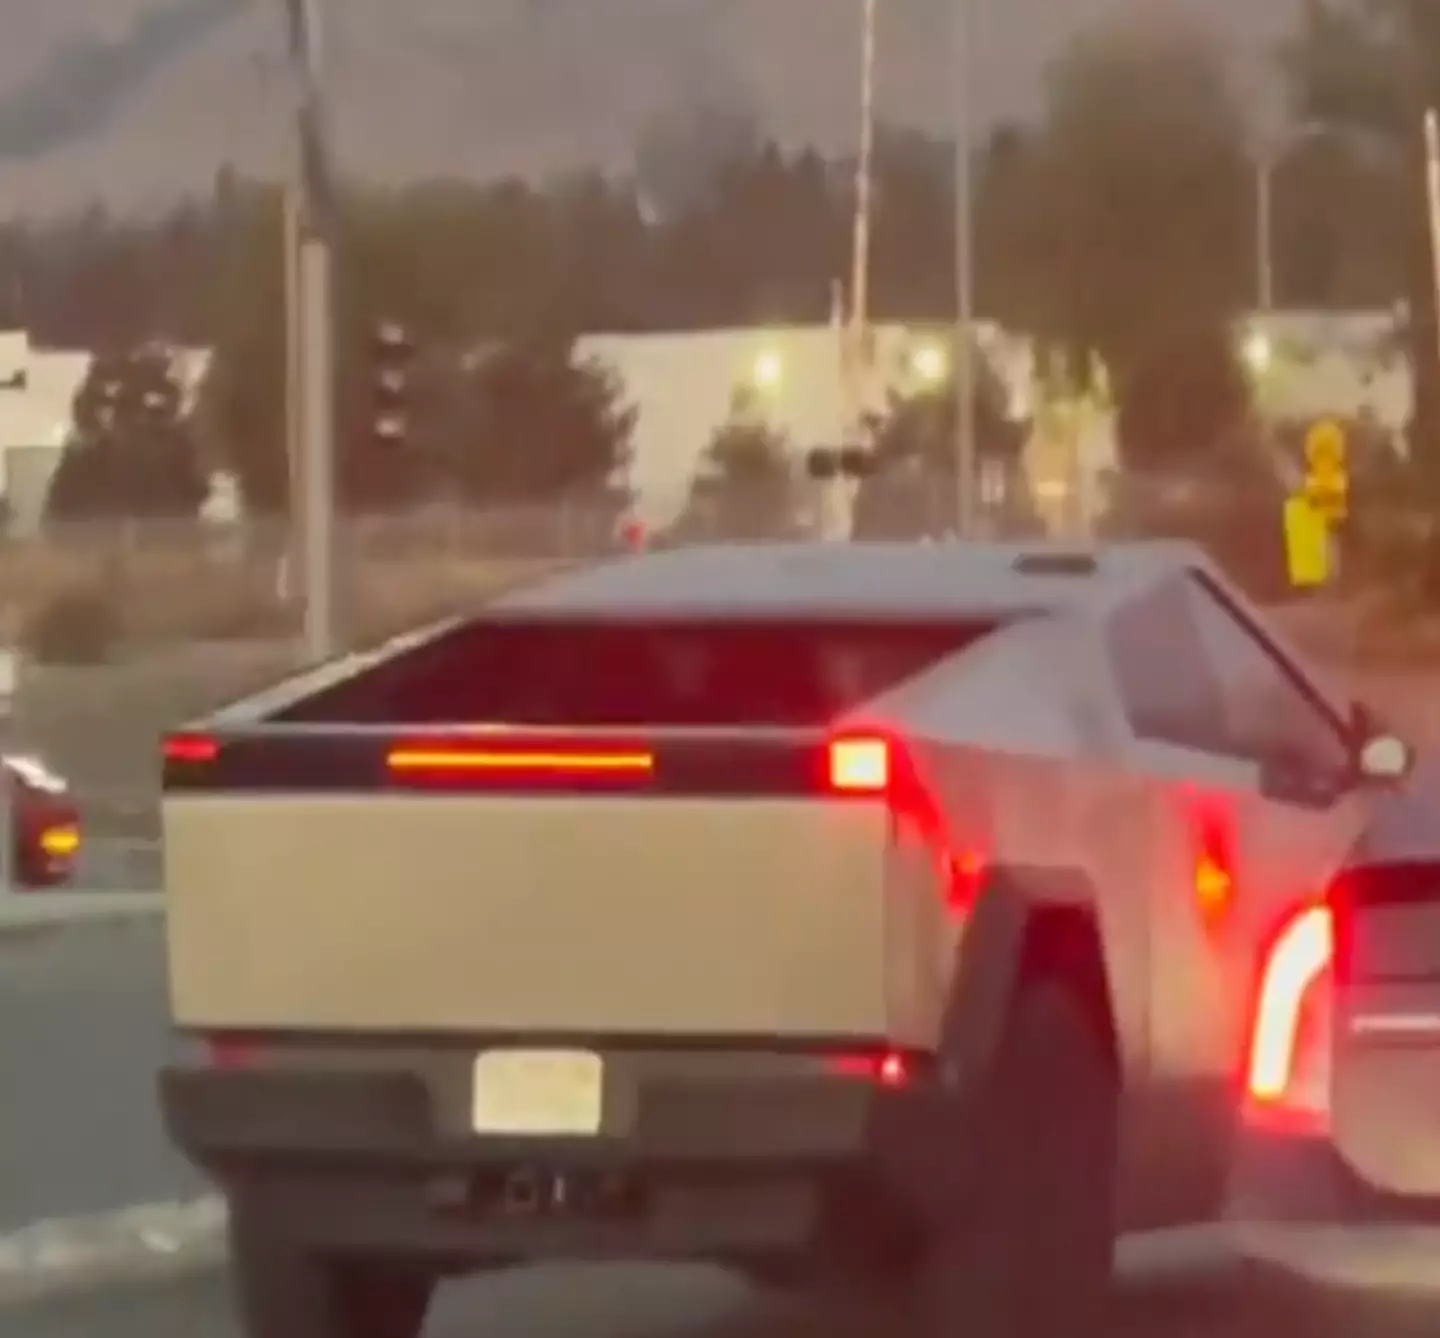 People are confused by the vehicle's brake lights, which are incredibly similar to its LED taillight.